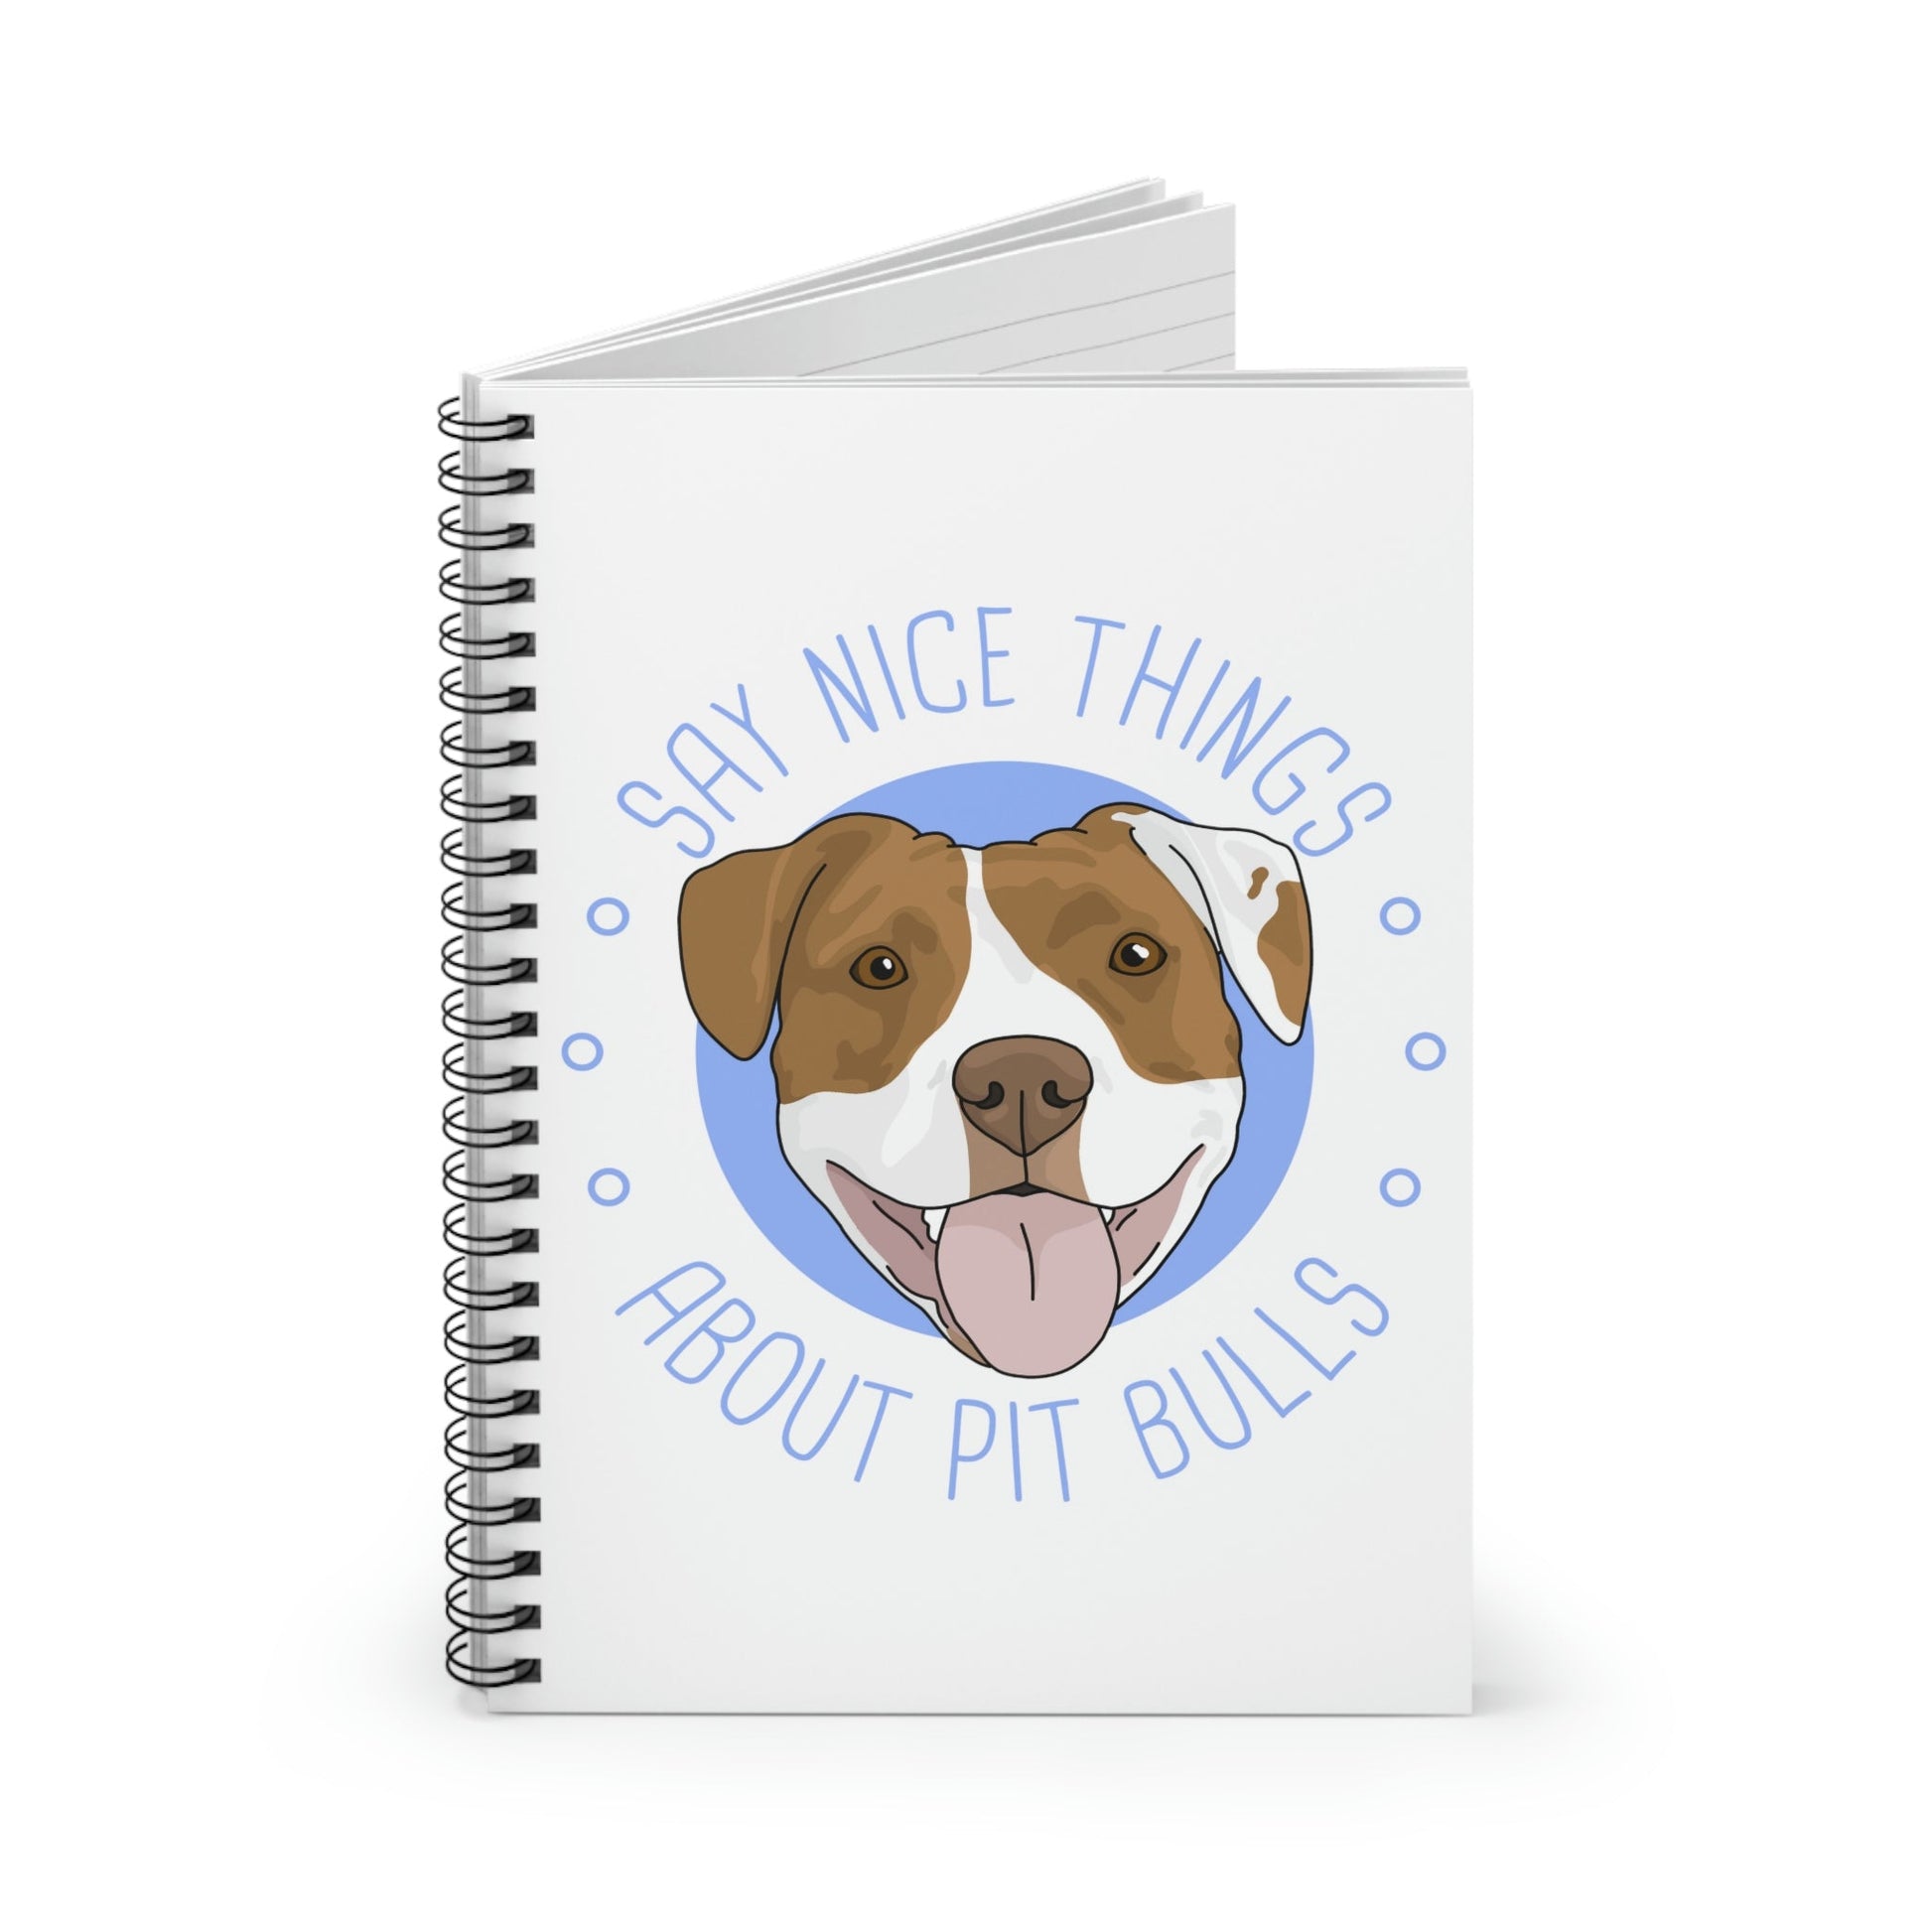 Say Nice Things About Pit Bulls | Notebook - Detezi Designs-32865508359570438822